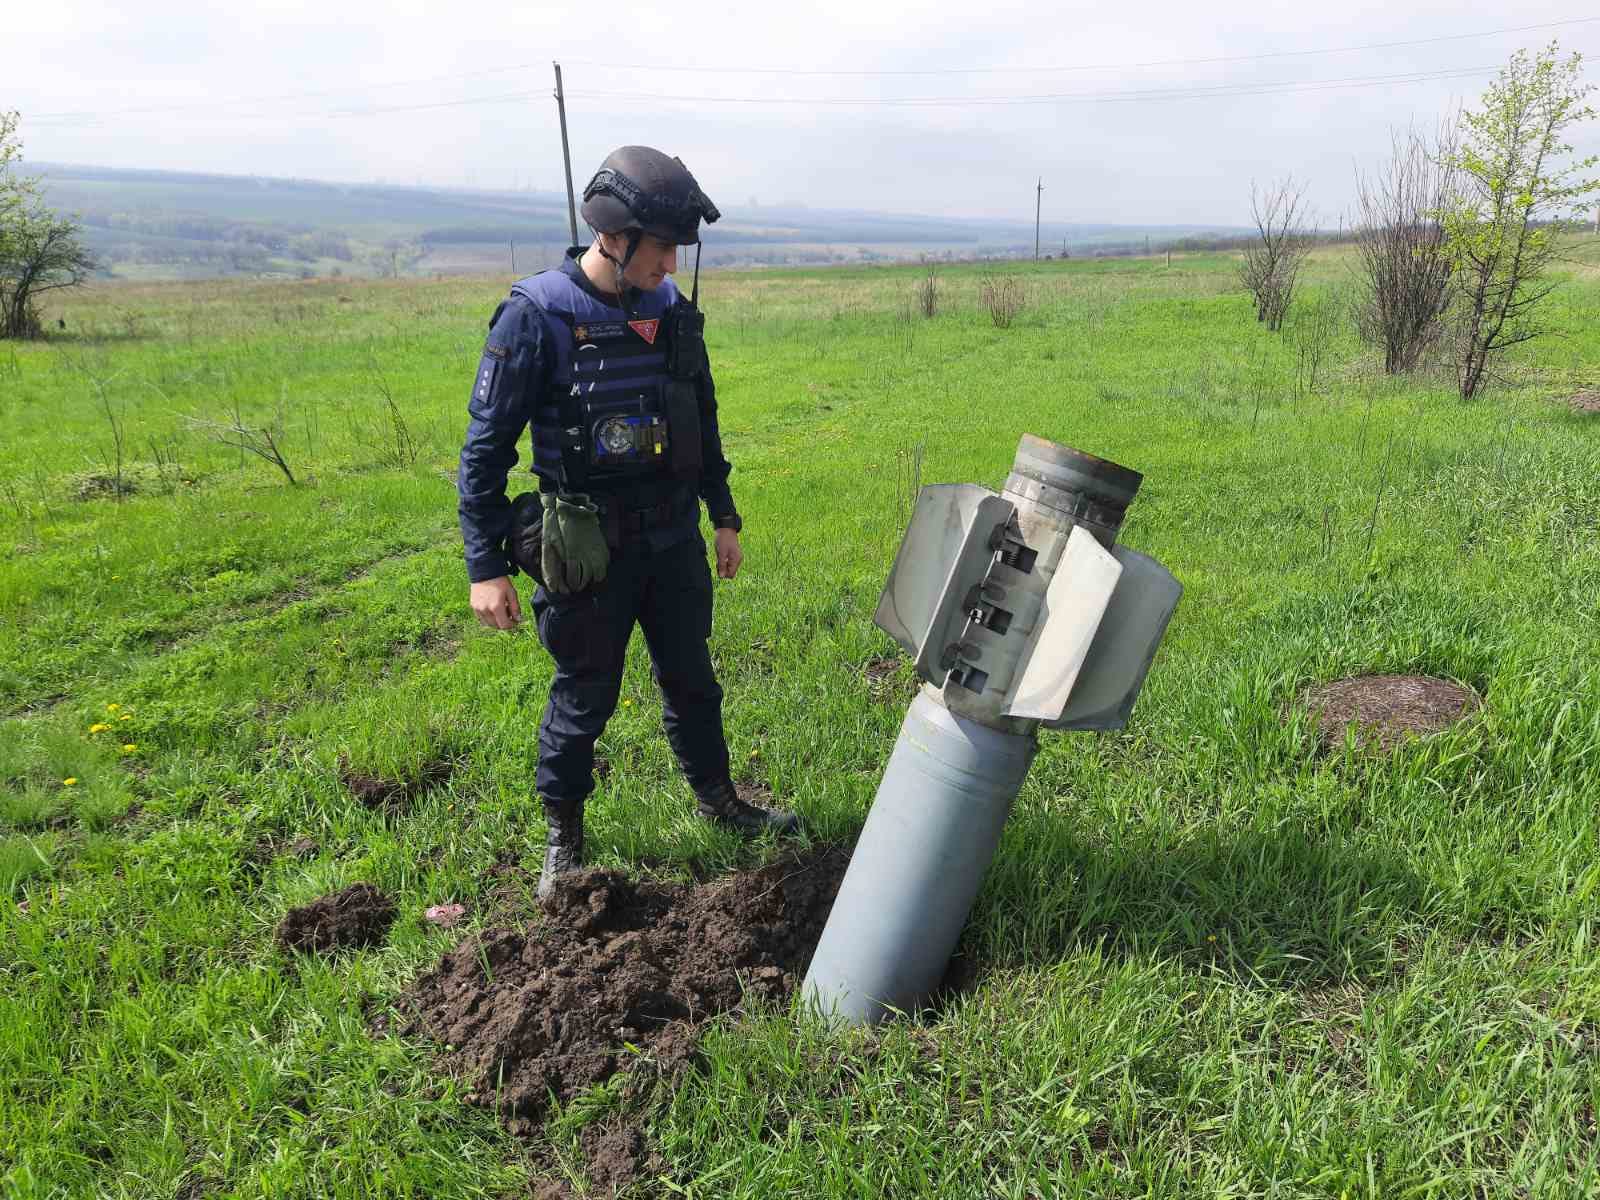 A member of Ukraine's State Emergency Service prepares to disable and remove a missile at Rubizhin in Ukraine's Luhansk region, on April 27.